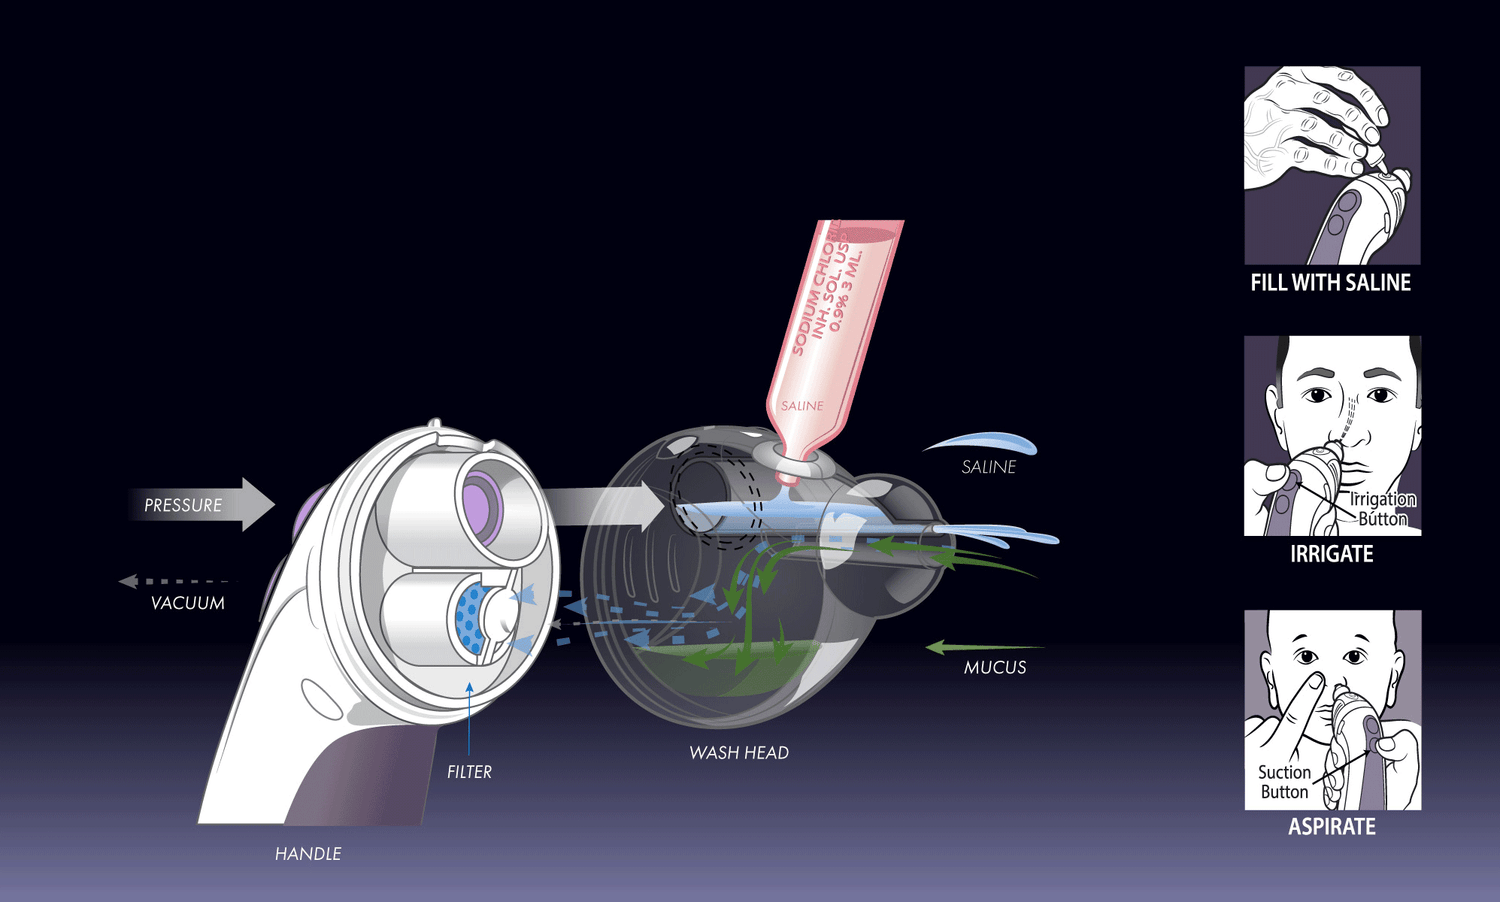 A diagram illustrating how the CLEARinse device works to flush out nasal passages with saline solution and suction